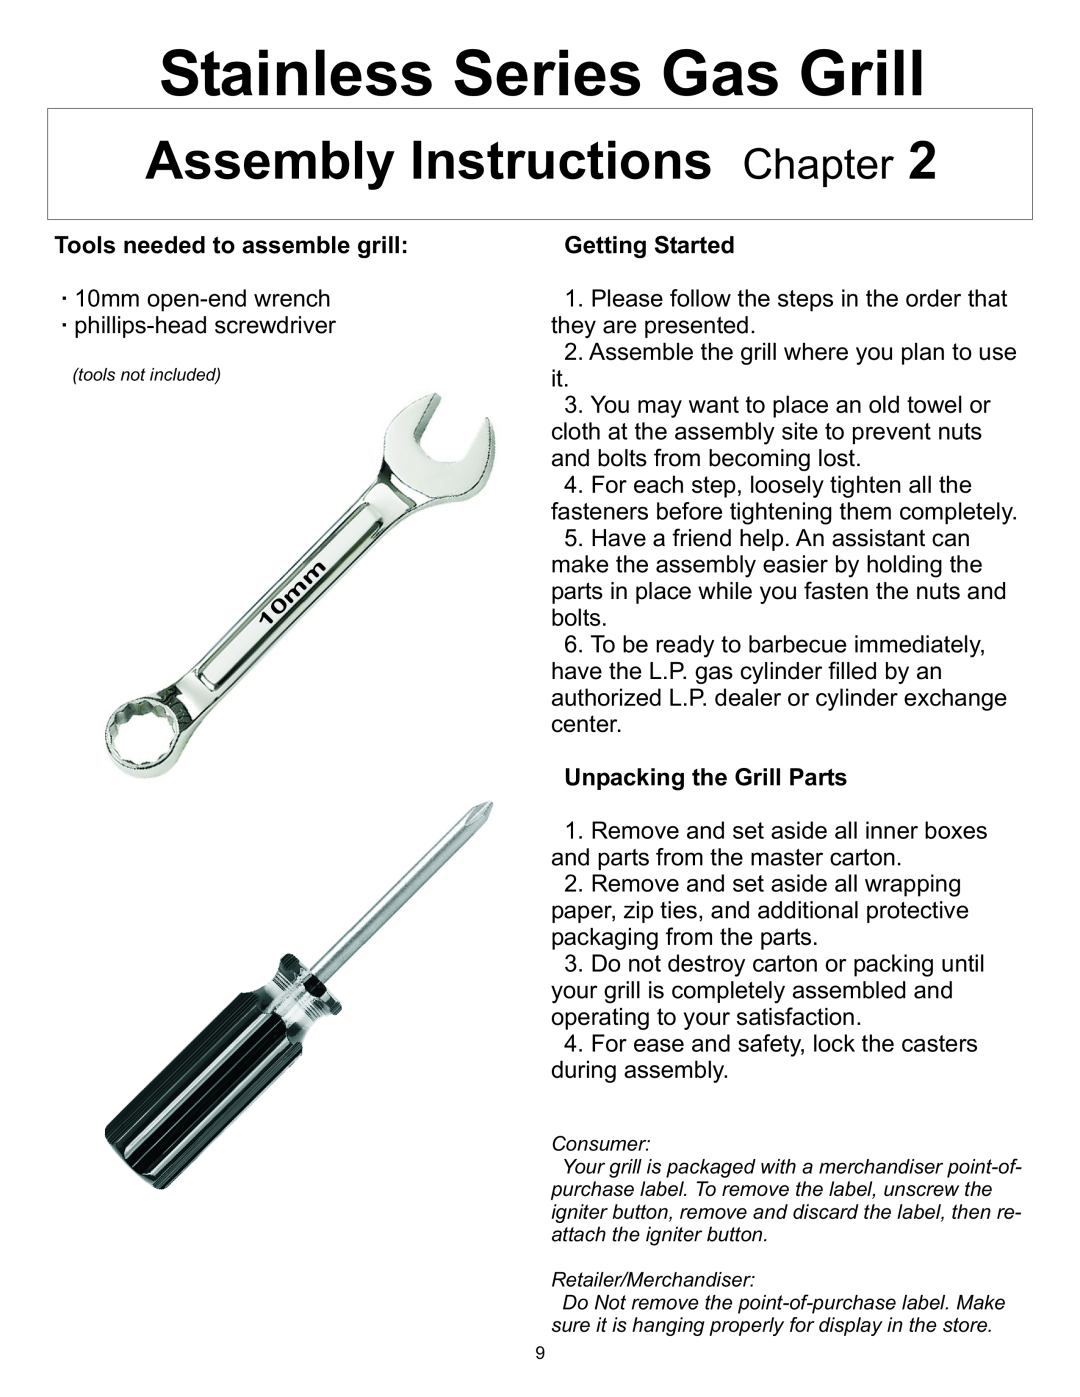 Vermont Casting owner manual Assembly Instructions Chapter, Stainless Series Gas Grill, Tools needed to assemble grill 